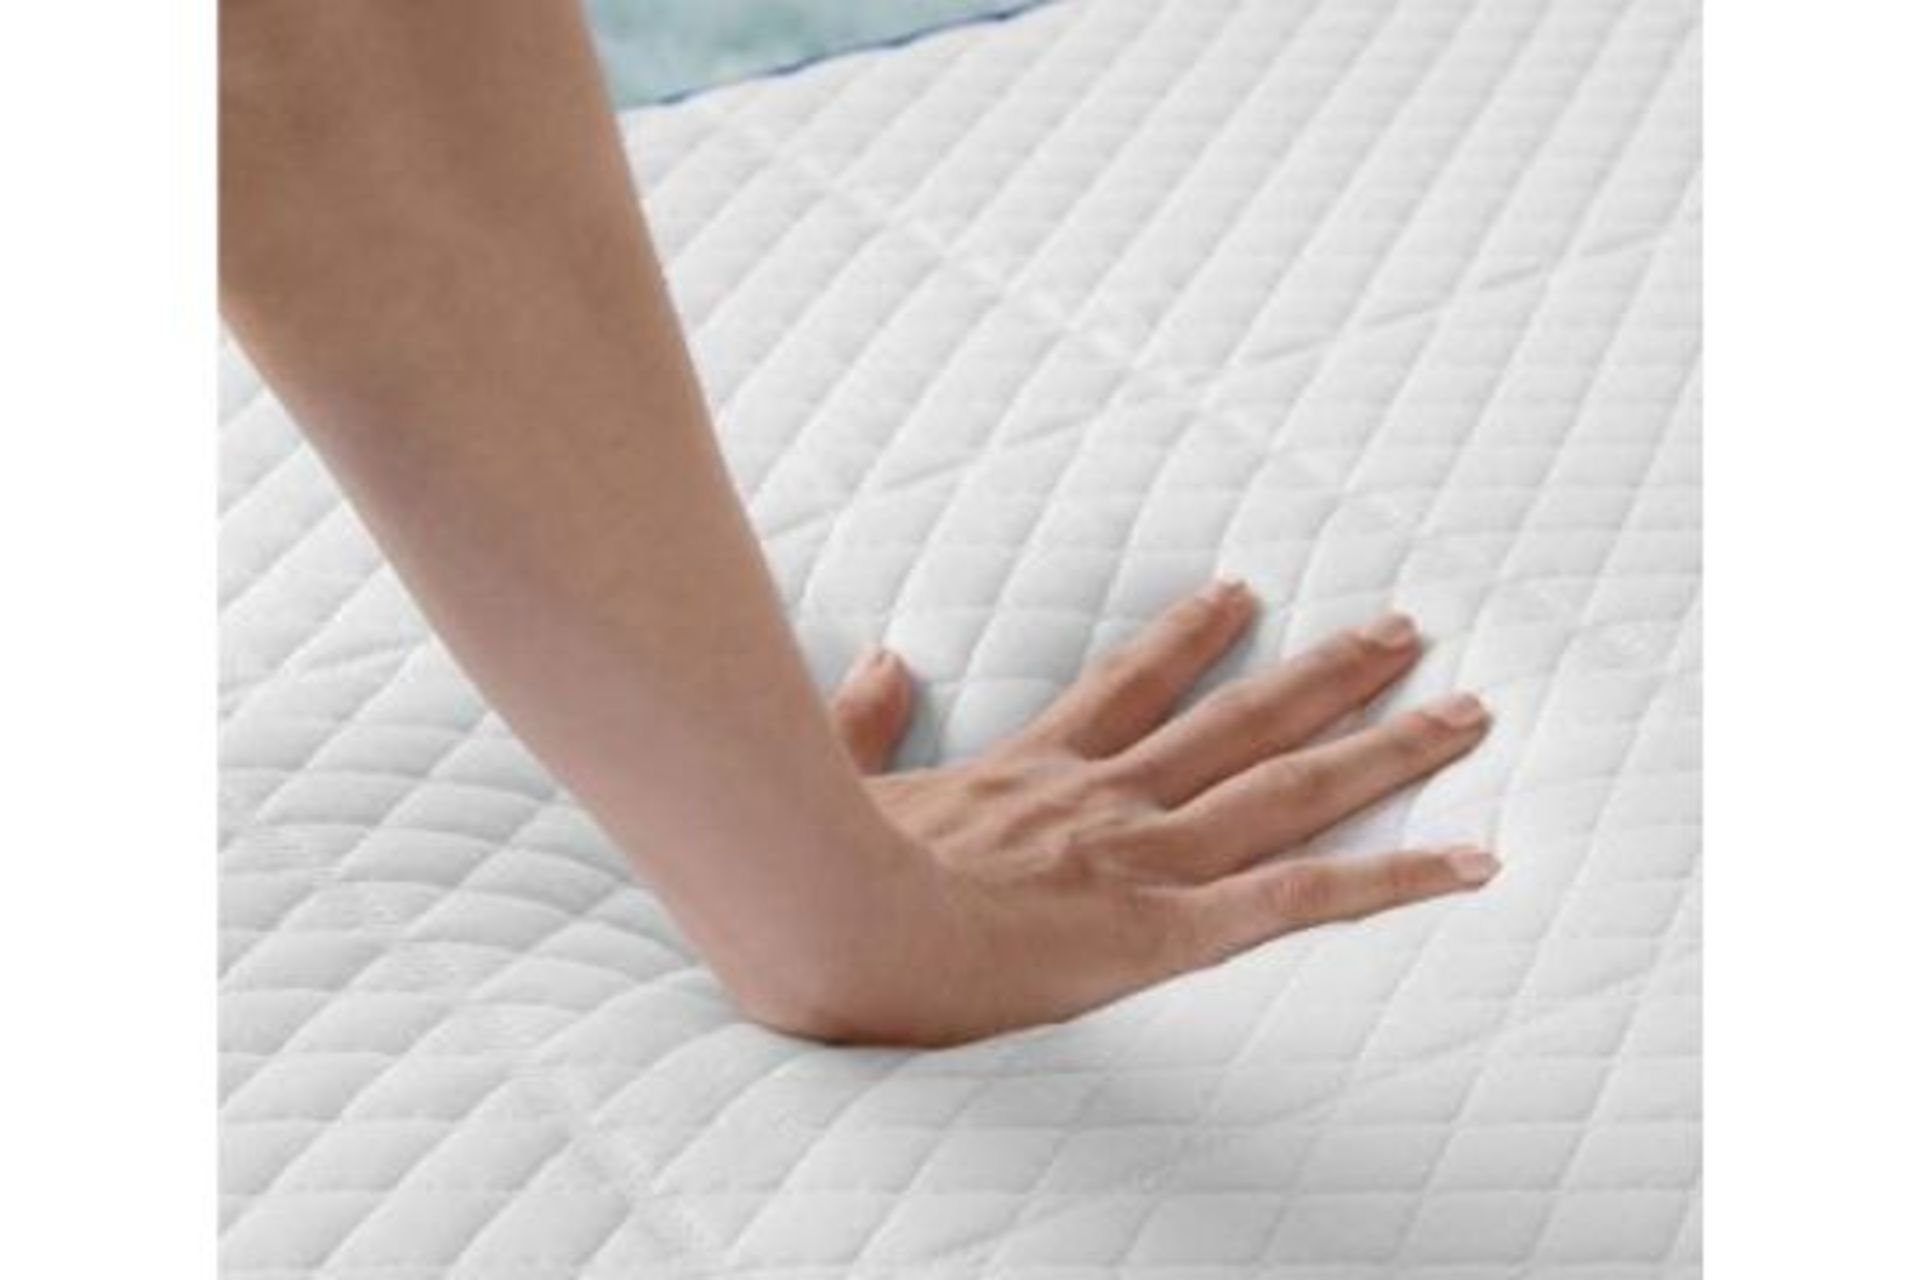 5ft Nectar Professionally Refurbished Smart Pressure Relieving Memory Foam Mattress|RRP £669| - Image 3 of 4